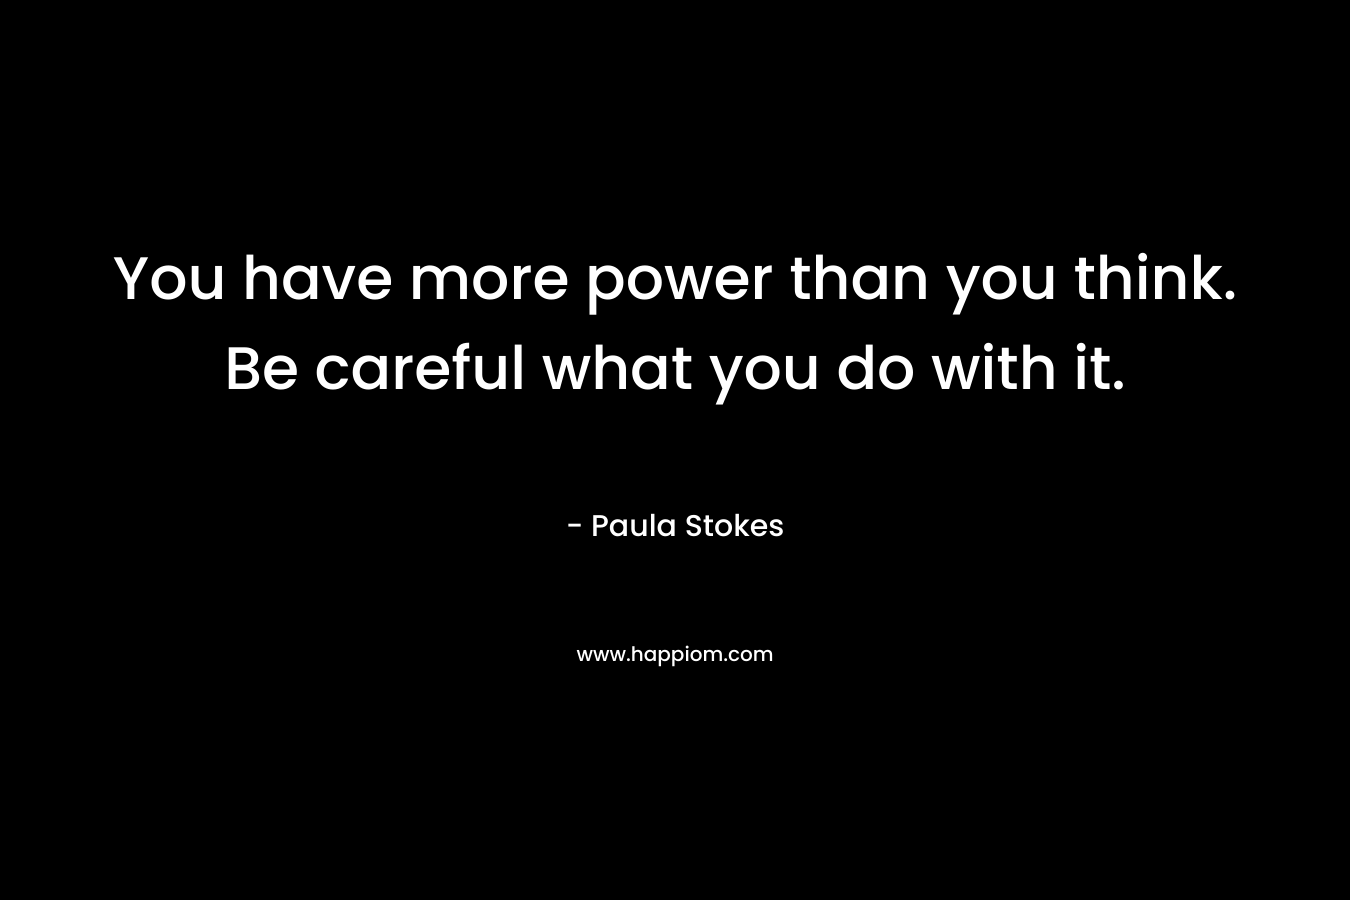 You have more power than you think. Be careful what you do with it.